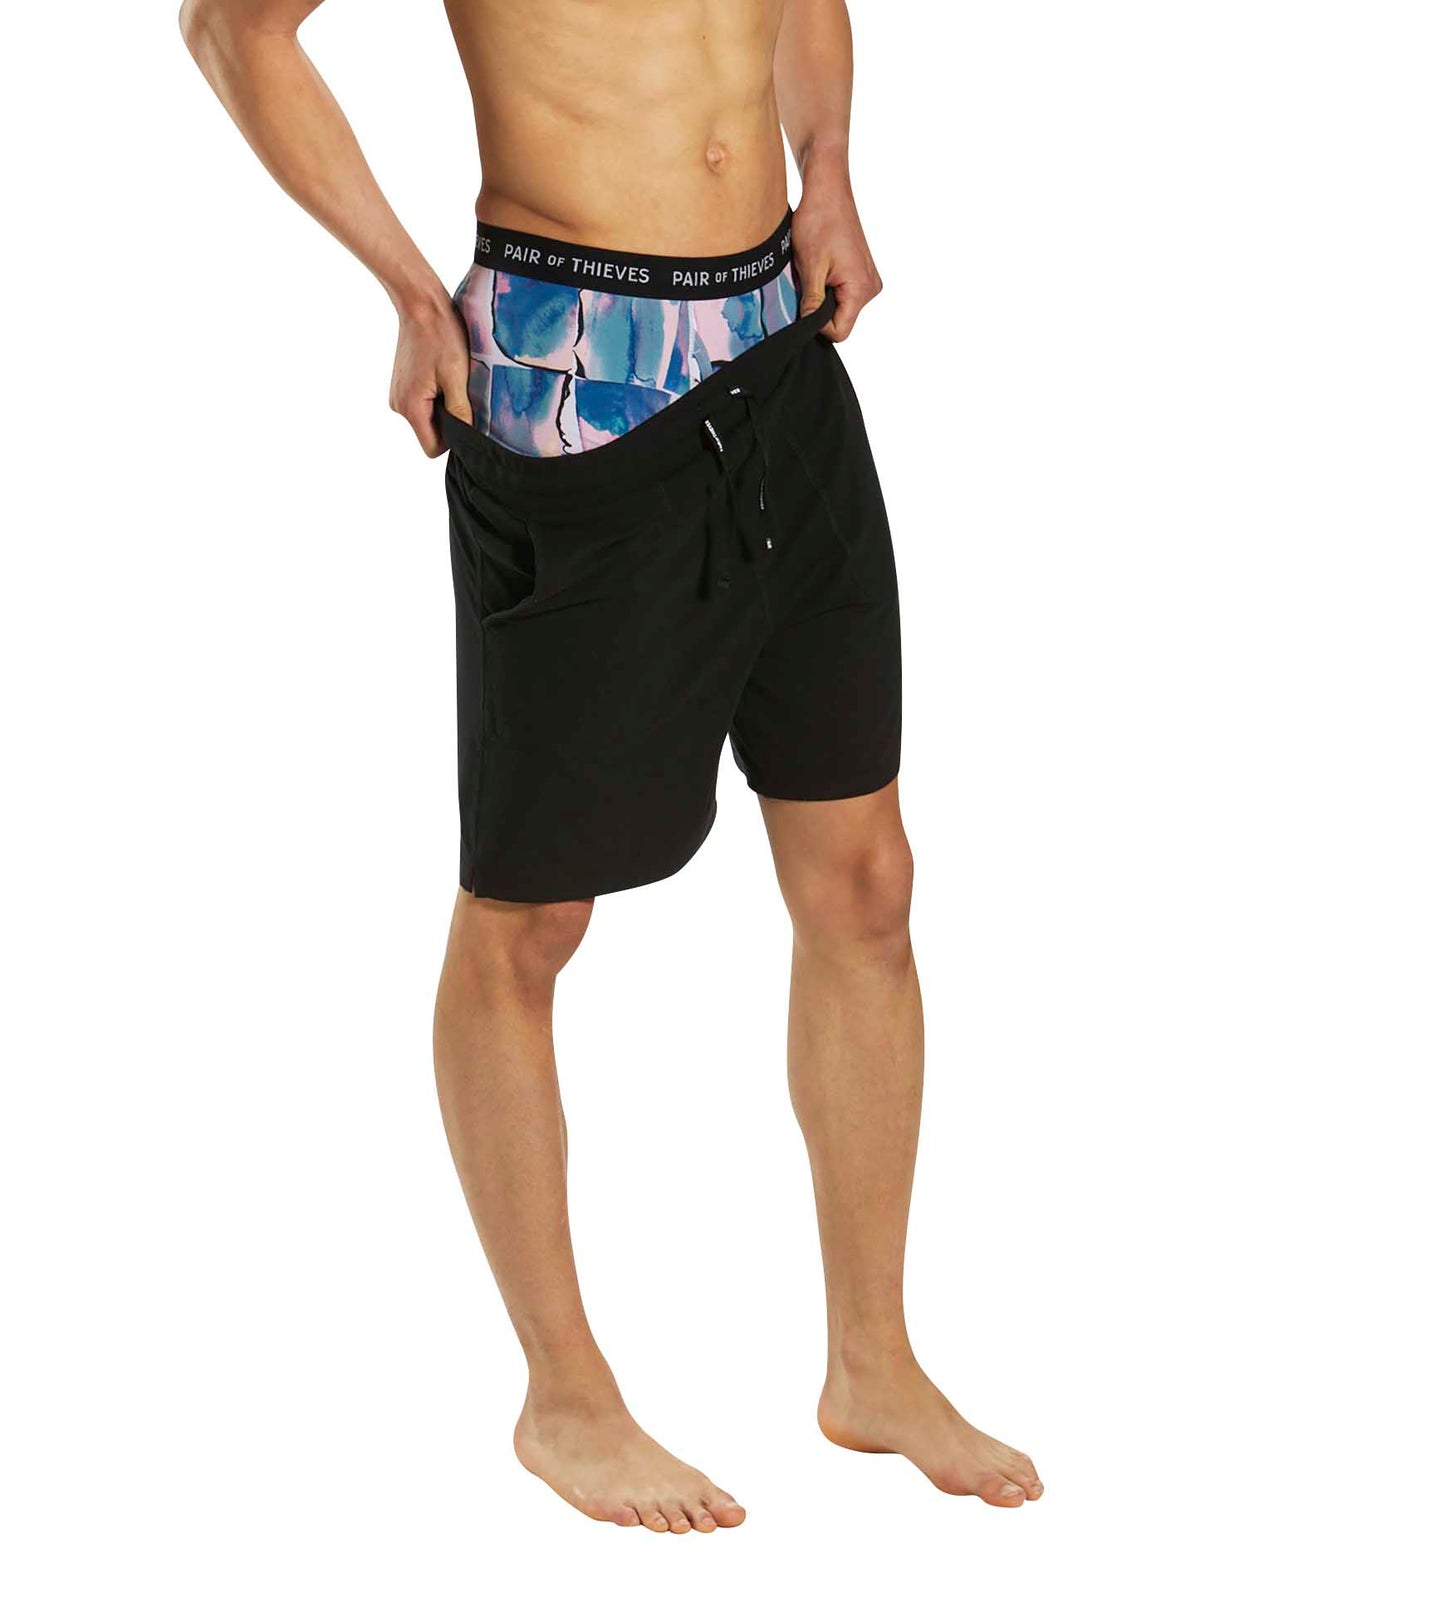 SuperSoft Boxer Brief 2 Pack colors contain: Silver, Black, Rosy brown, Teal, Sienna, Peru, Tan, Lights late gray, Dark olive green